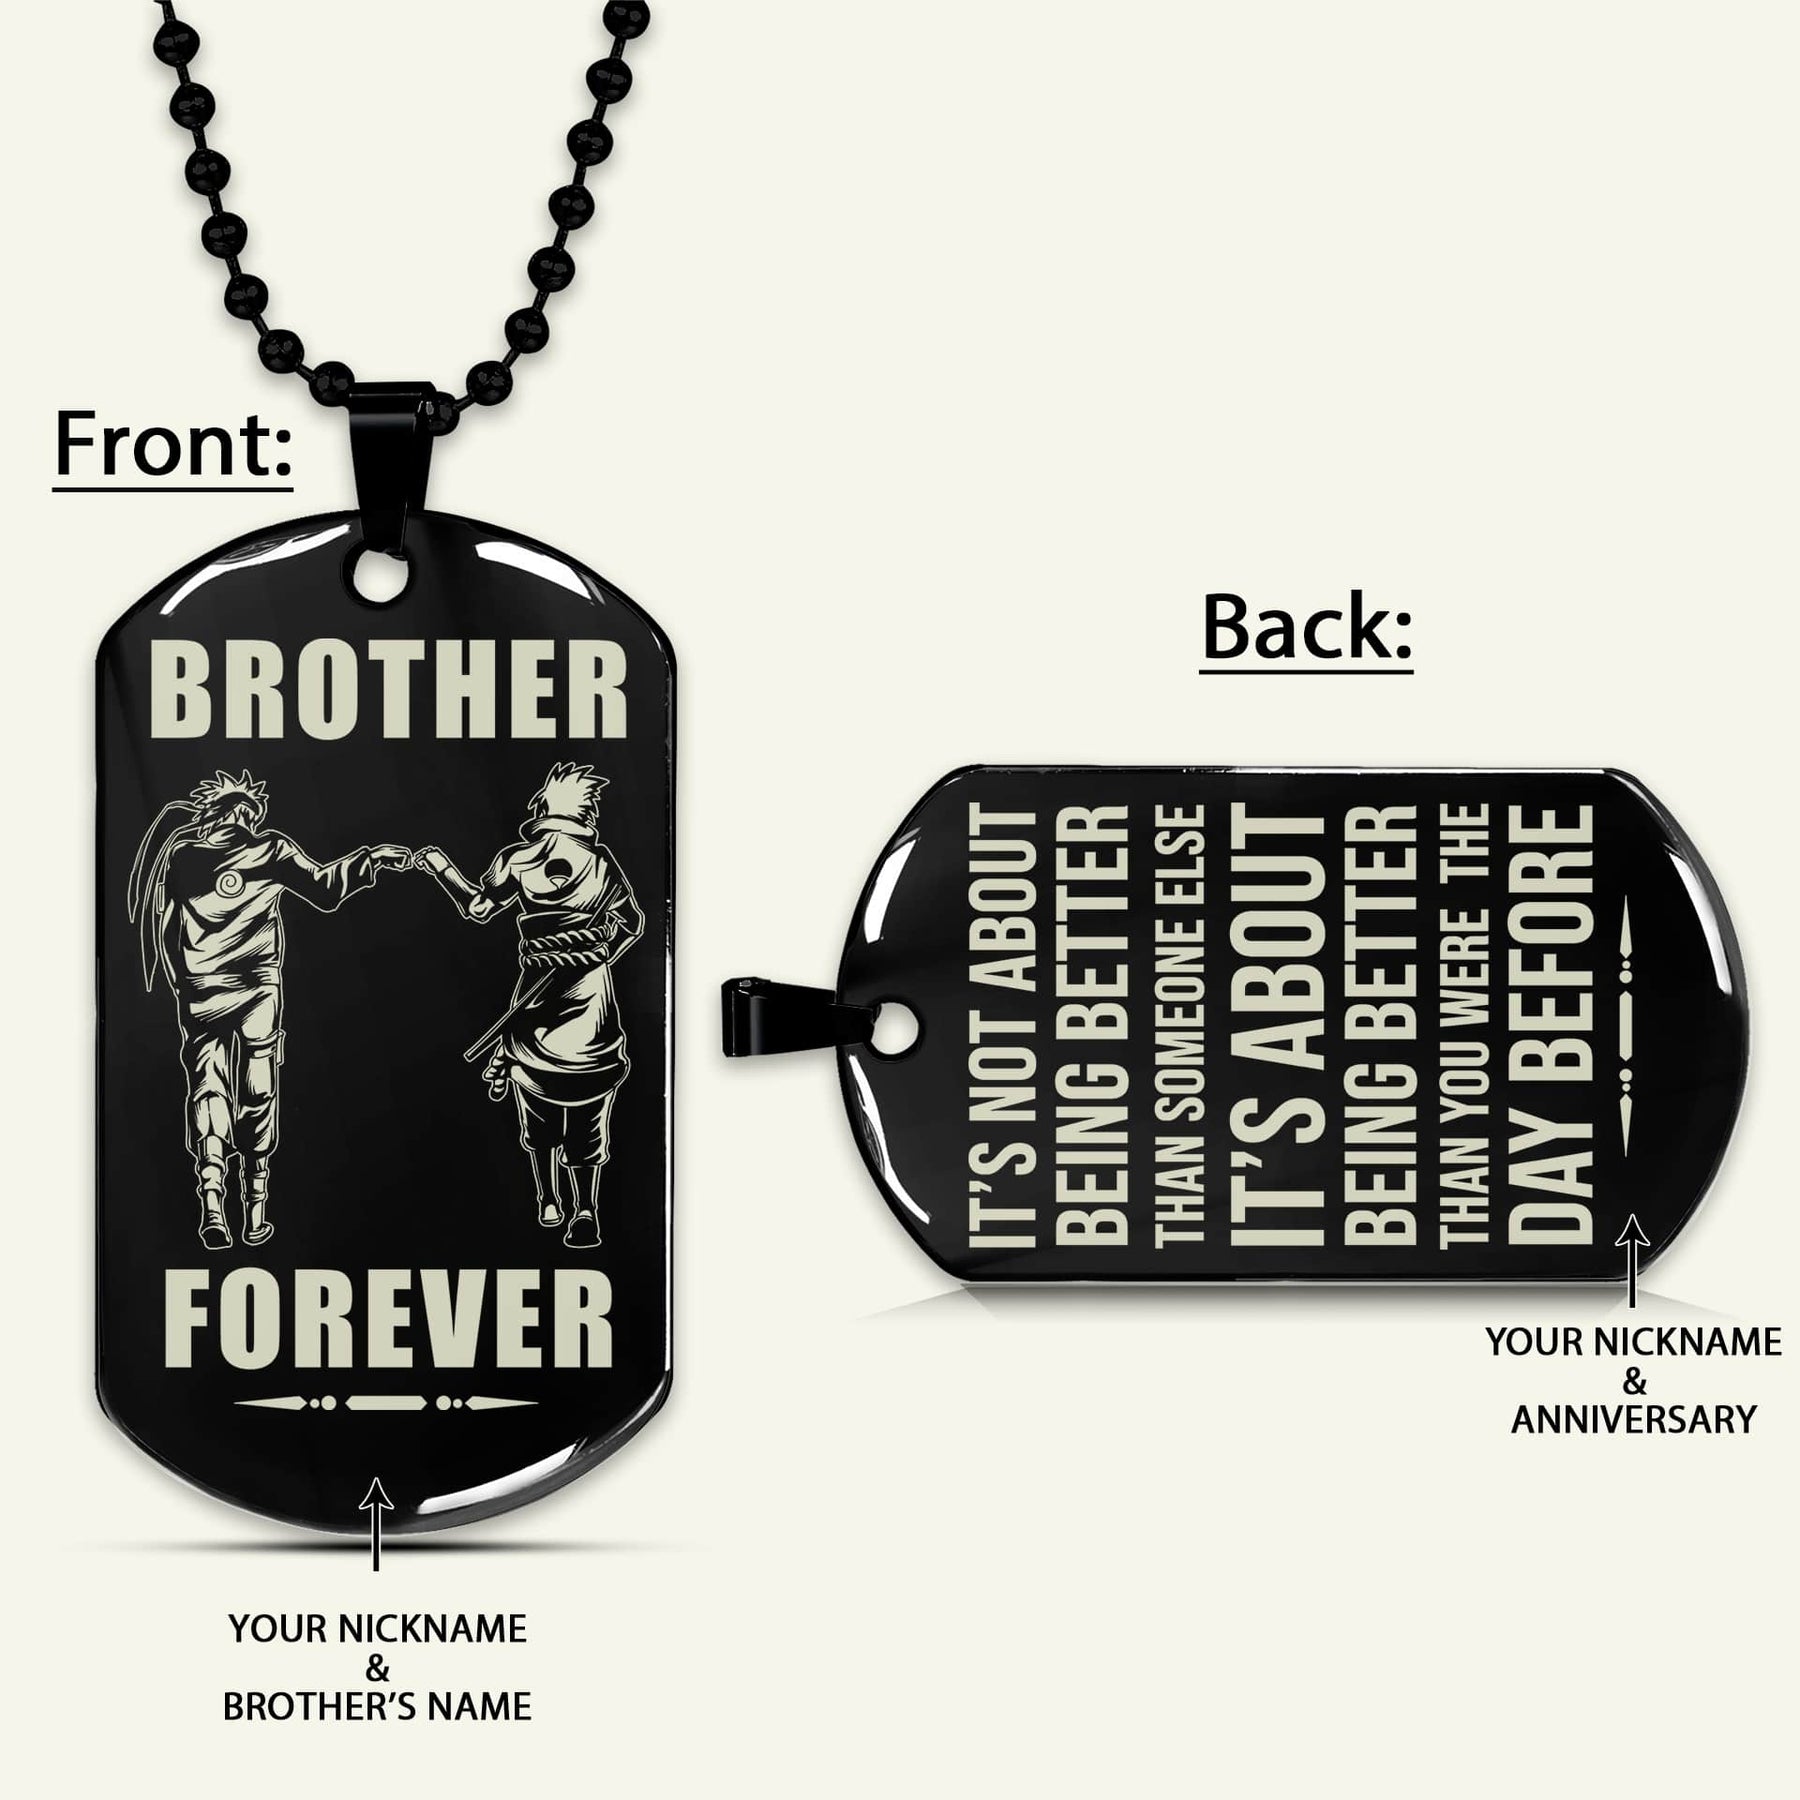 NAD029 - Brother Forever - It's Not About Being Better Than Someone Else - It's About Being Better Than You Were The Day Before - Uzumaki Naruto - Uchiha Sasuke - Naruto Dog Tag - Engrave Double Side Black Dog Tag